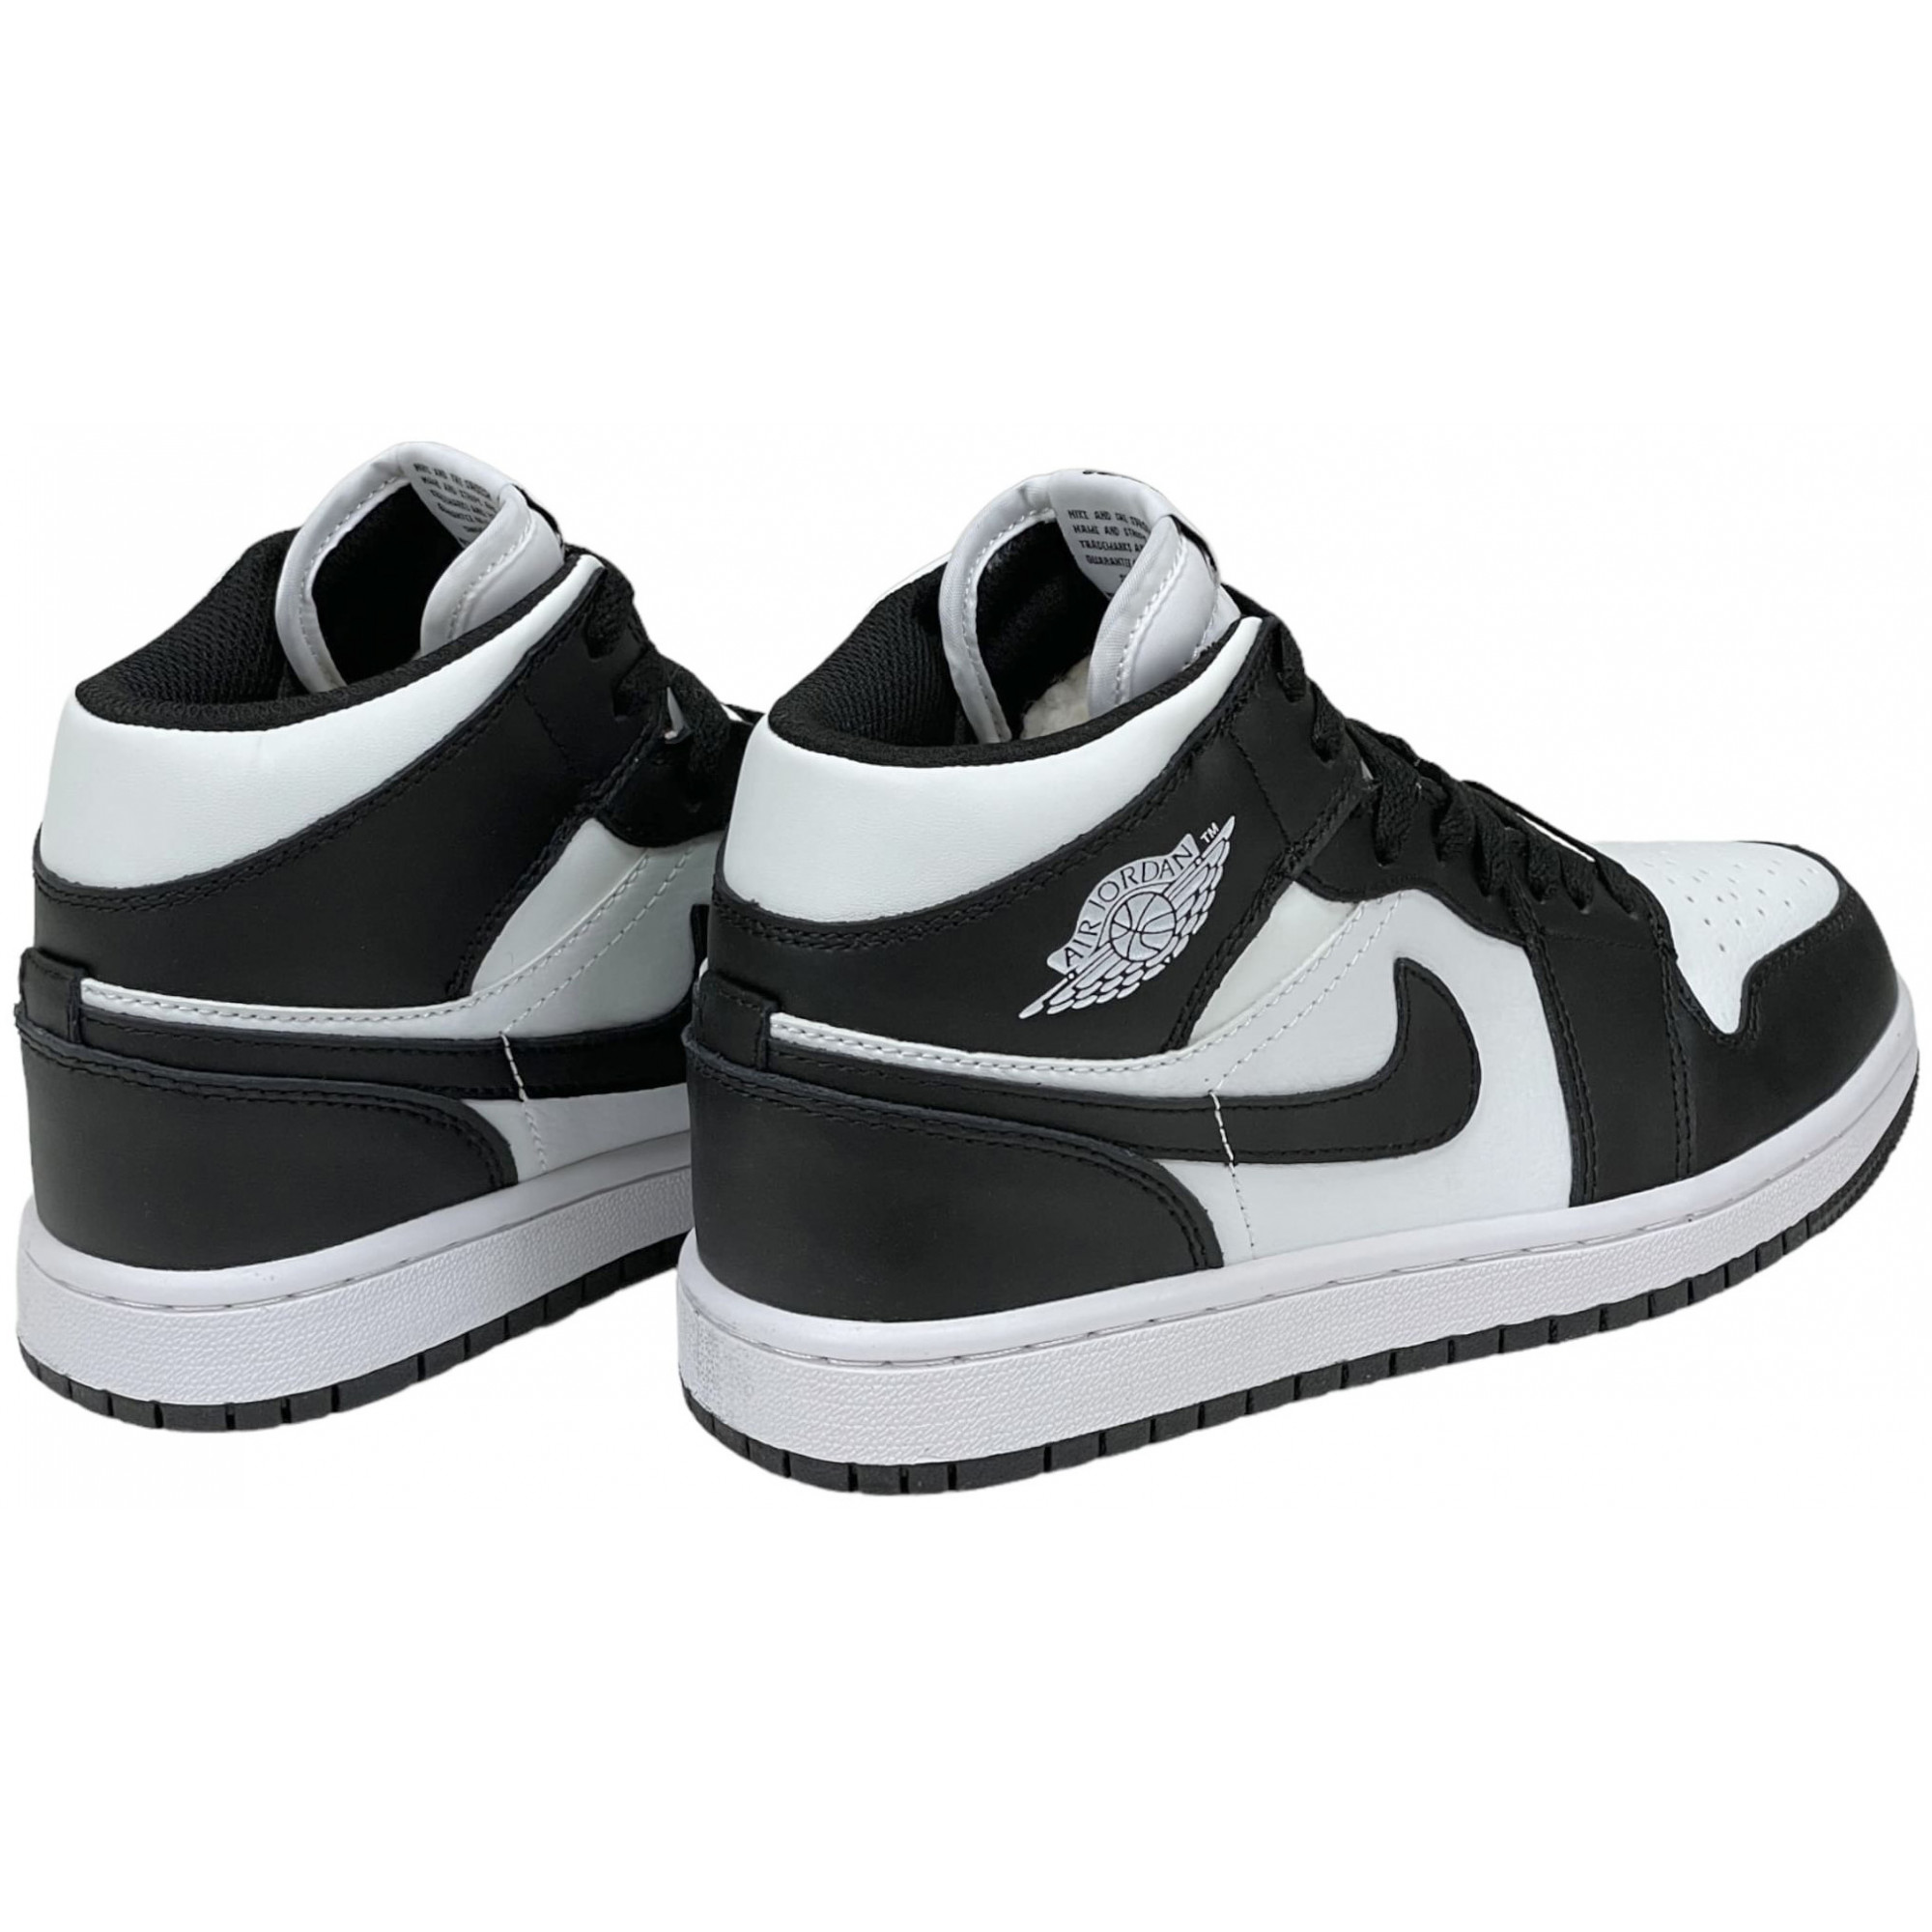 black and white youth jordans